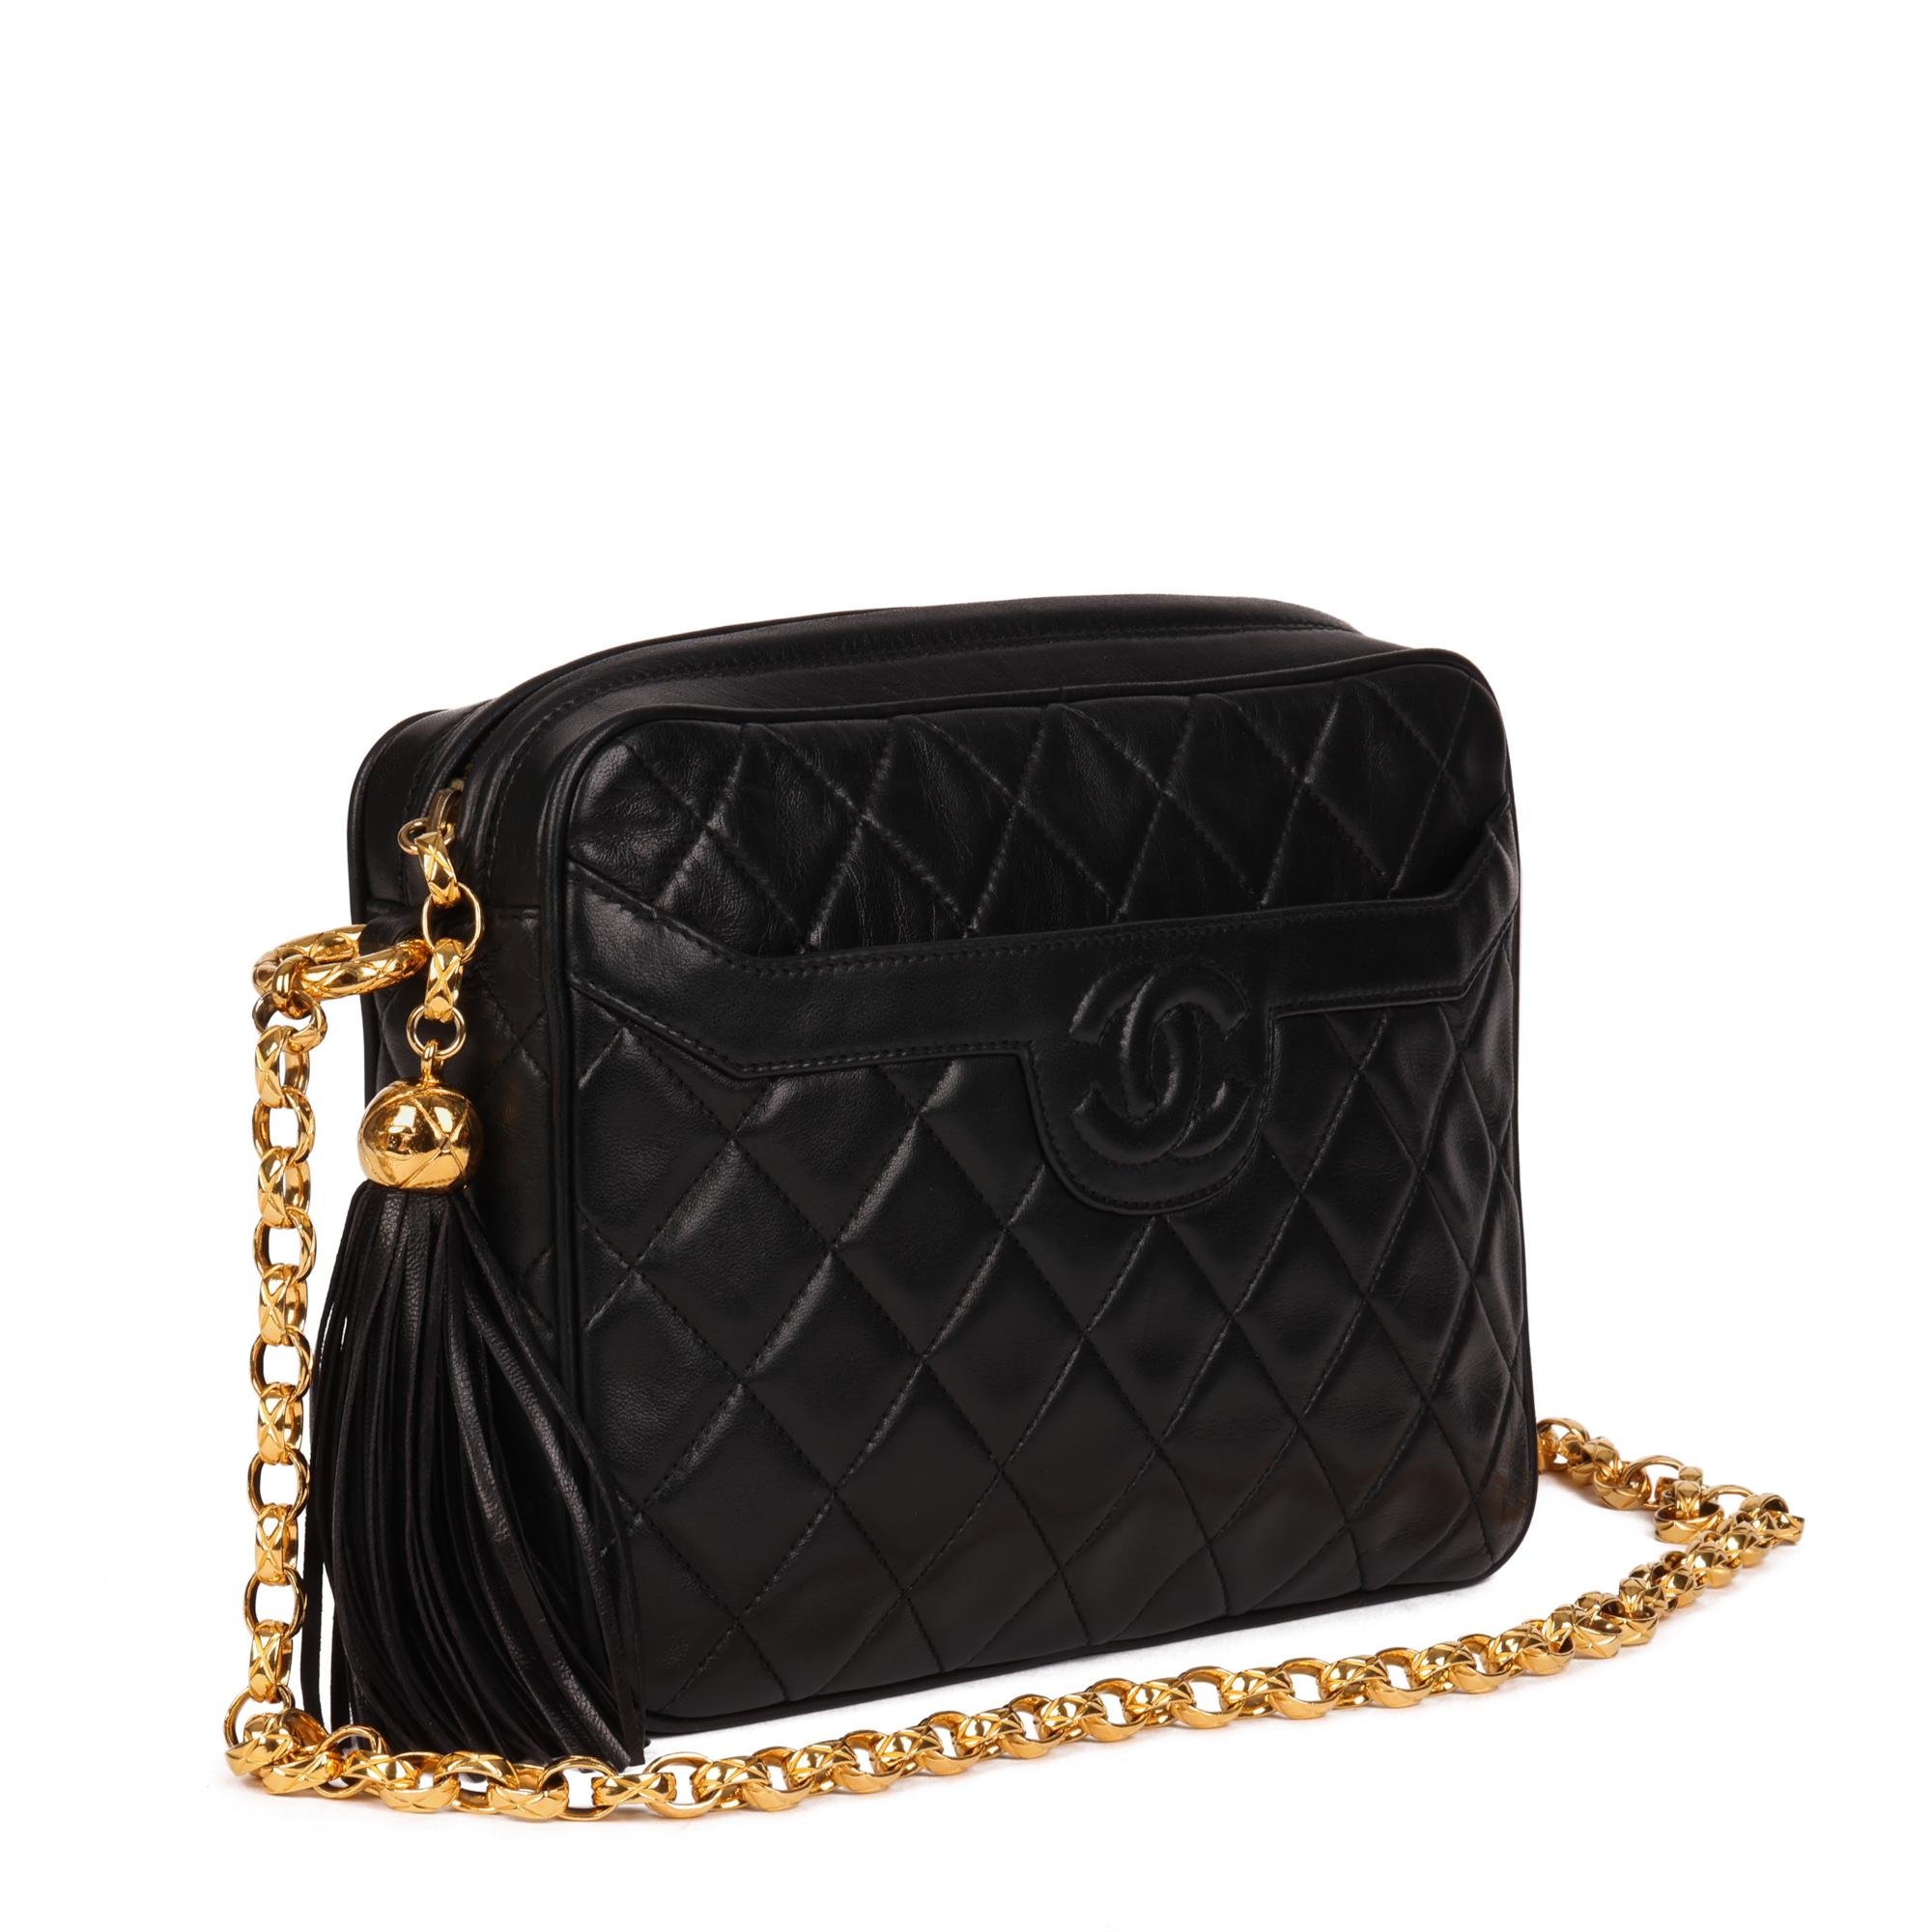 CHANEL
Black Quilted Lambskin Vintage Small Timeless Fringe Camera Bag

Xupes Reference: HB4255
Serial Number: 1995570
Age (Circa): 1991
Accompanied By: Chanel Dust Bag, Authenticity Card
Authenticity Details: Authenticity Card, Serial Sticker (Made